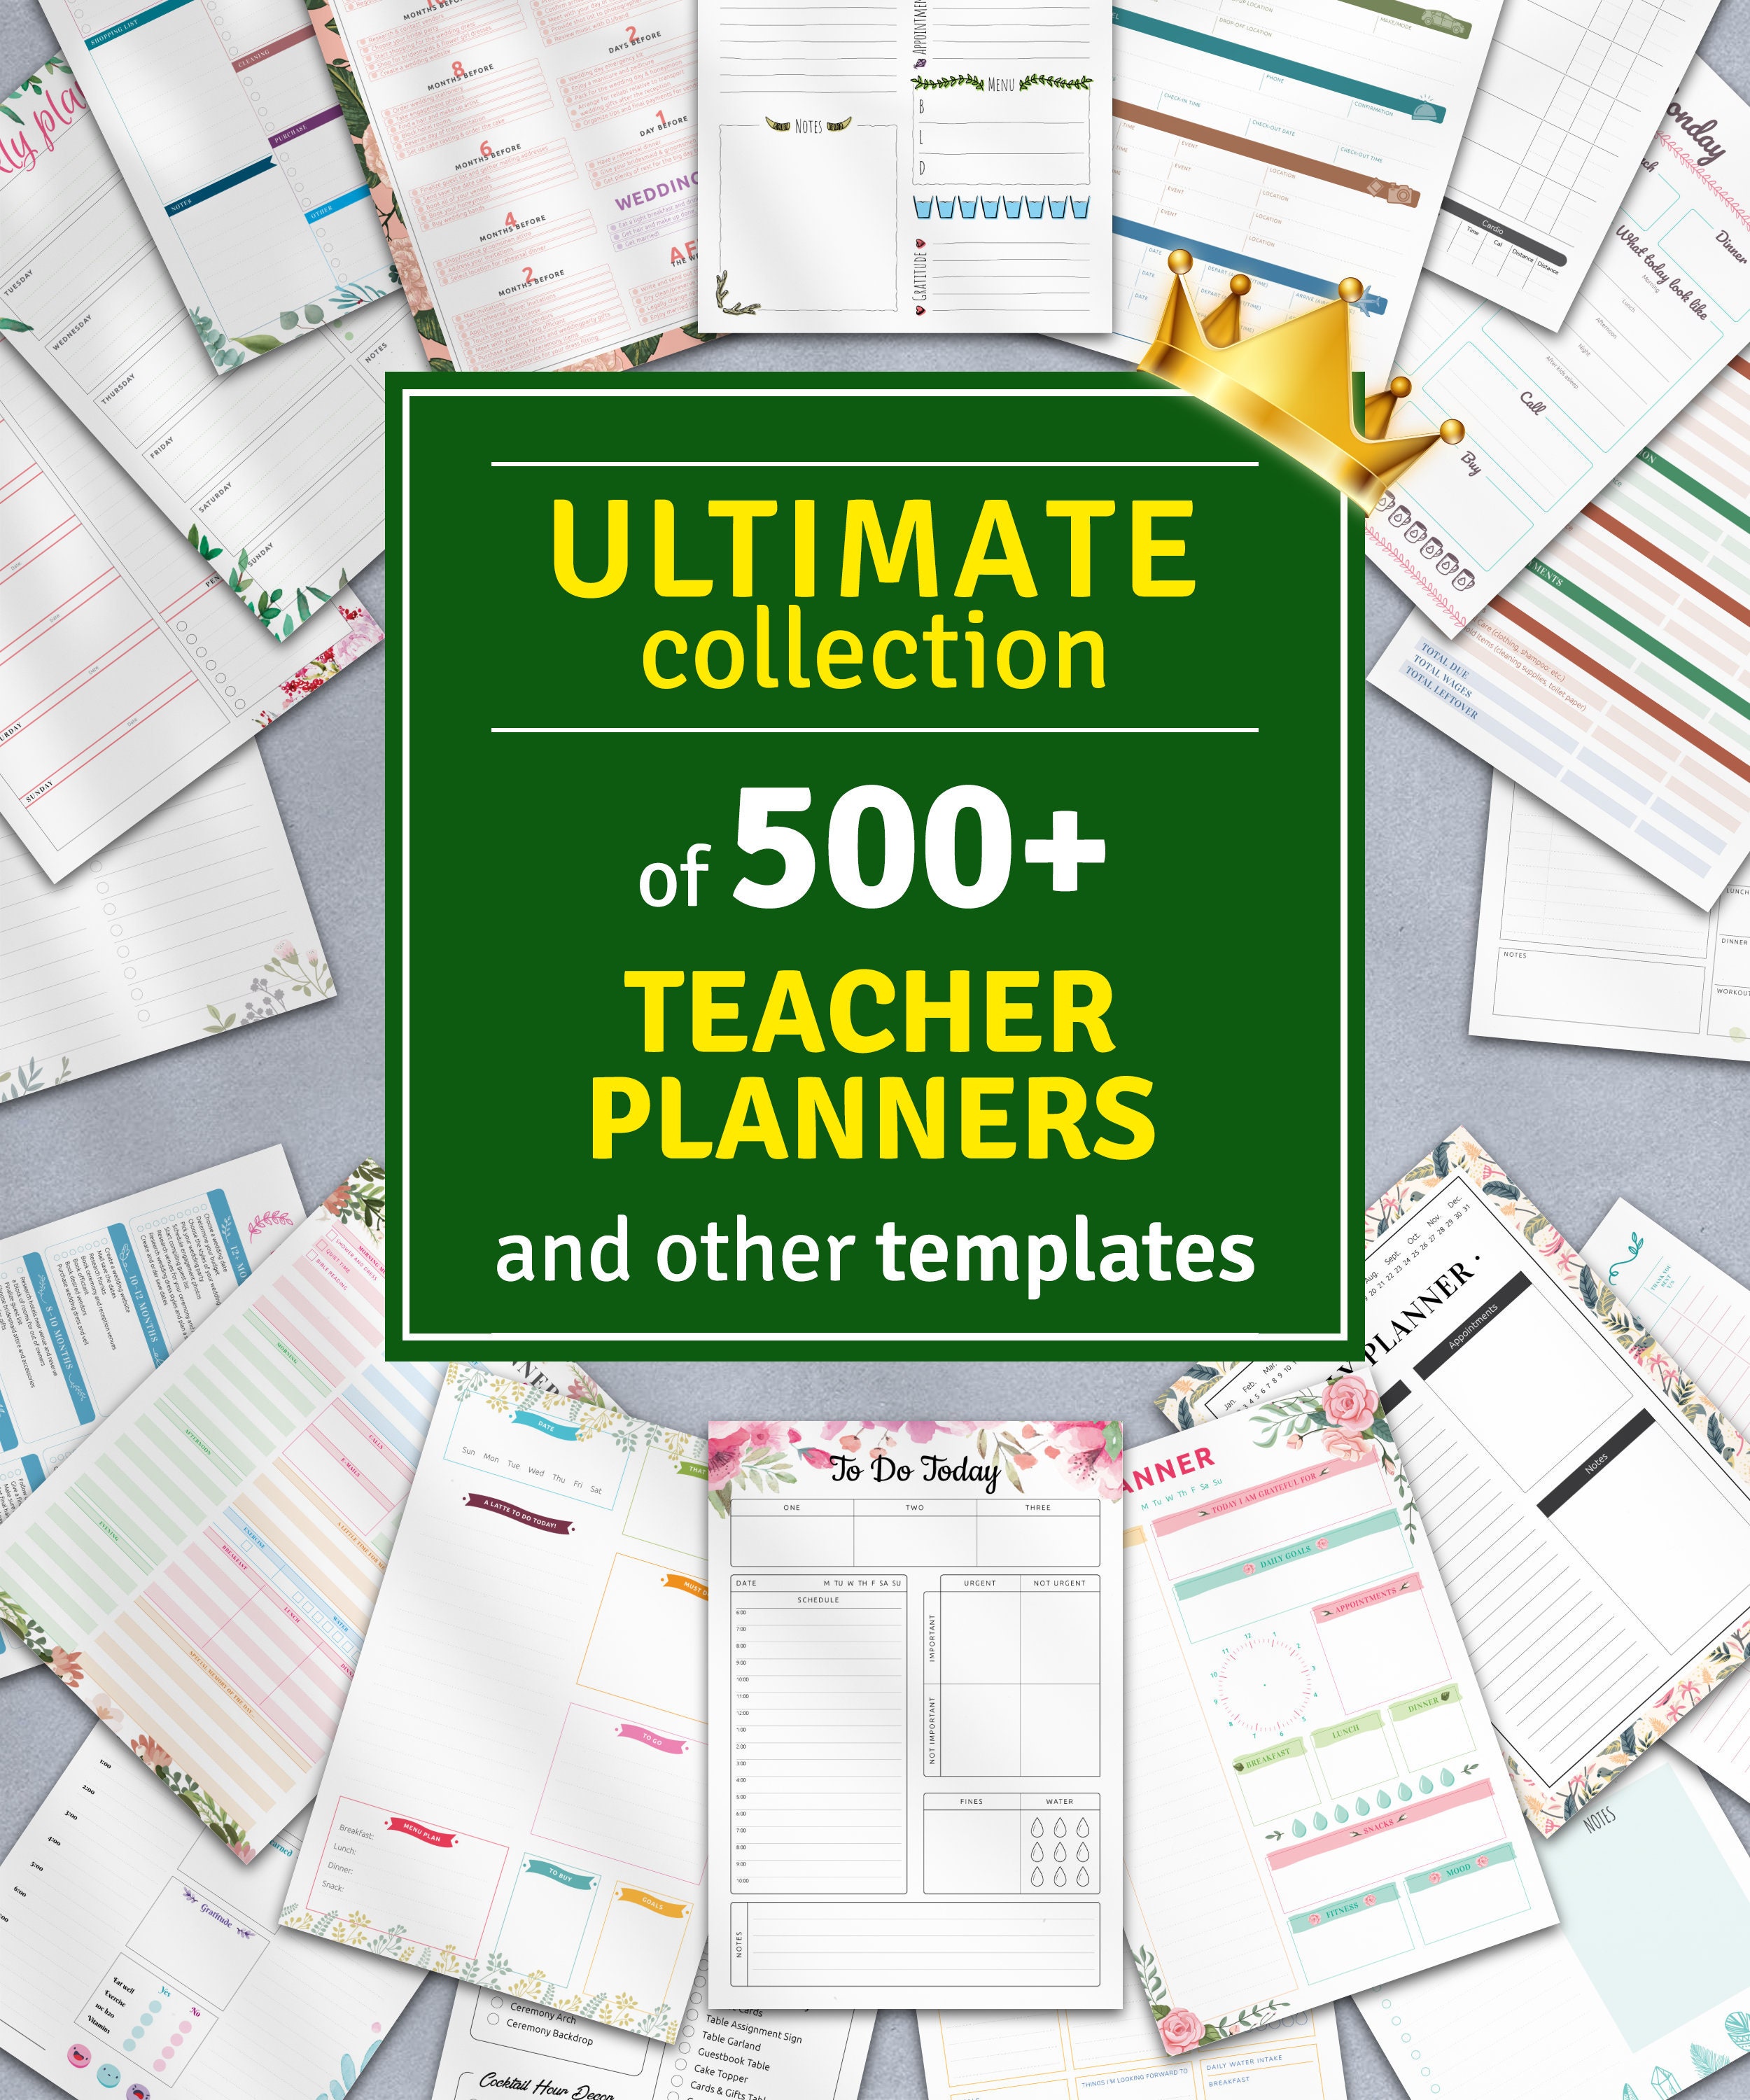 paper-calendars-planners-letter-size-classroom-roster-academic